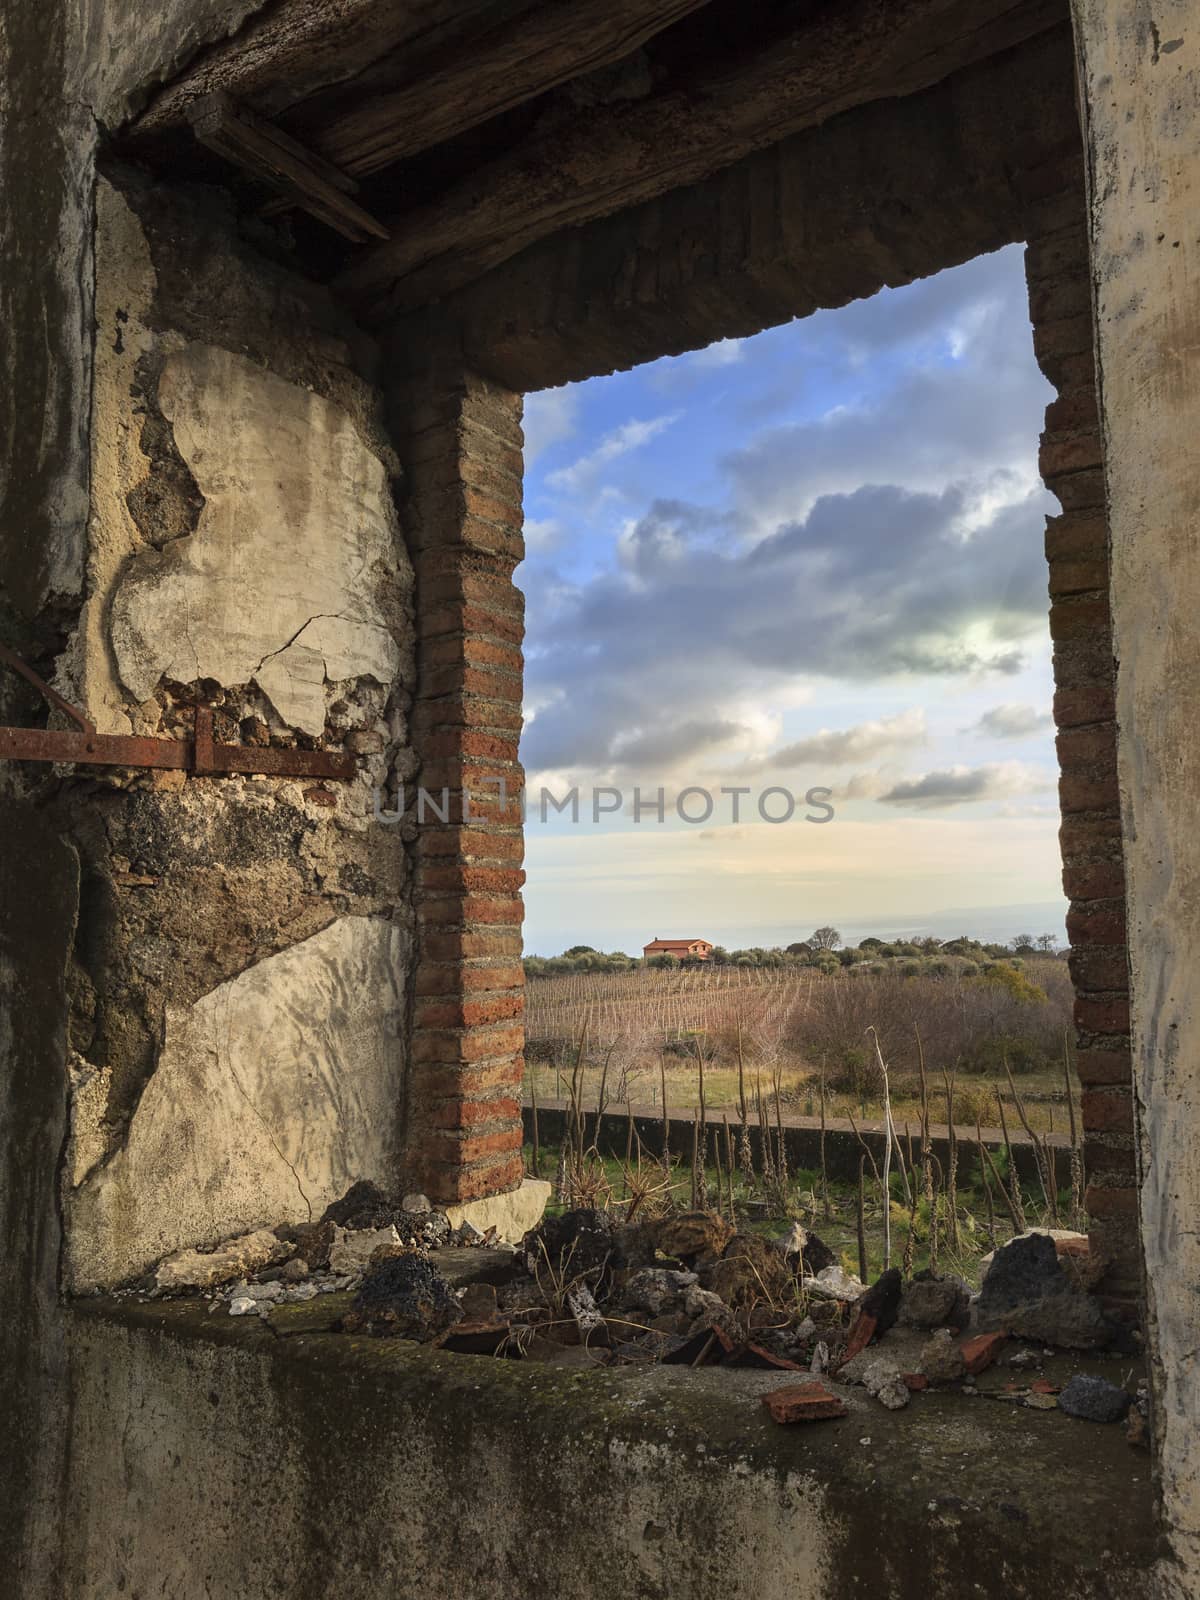 An old abandoned window showing the rural background outside. Catania, Sicily, Italy